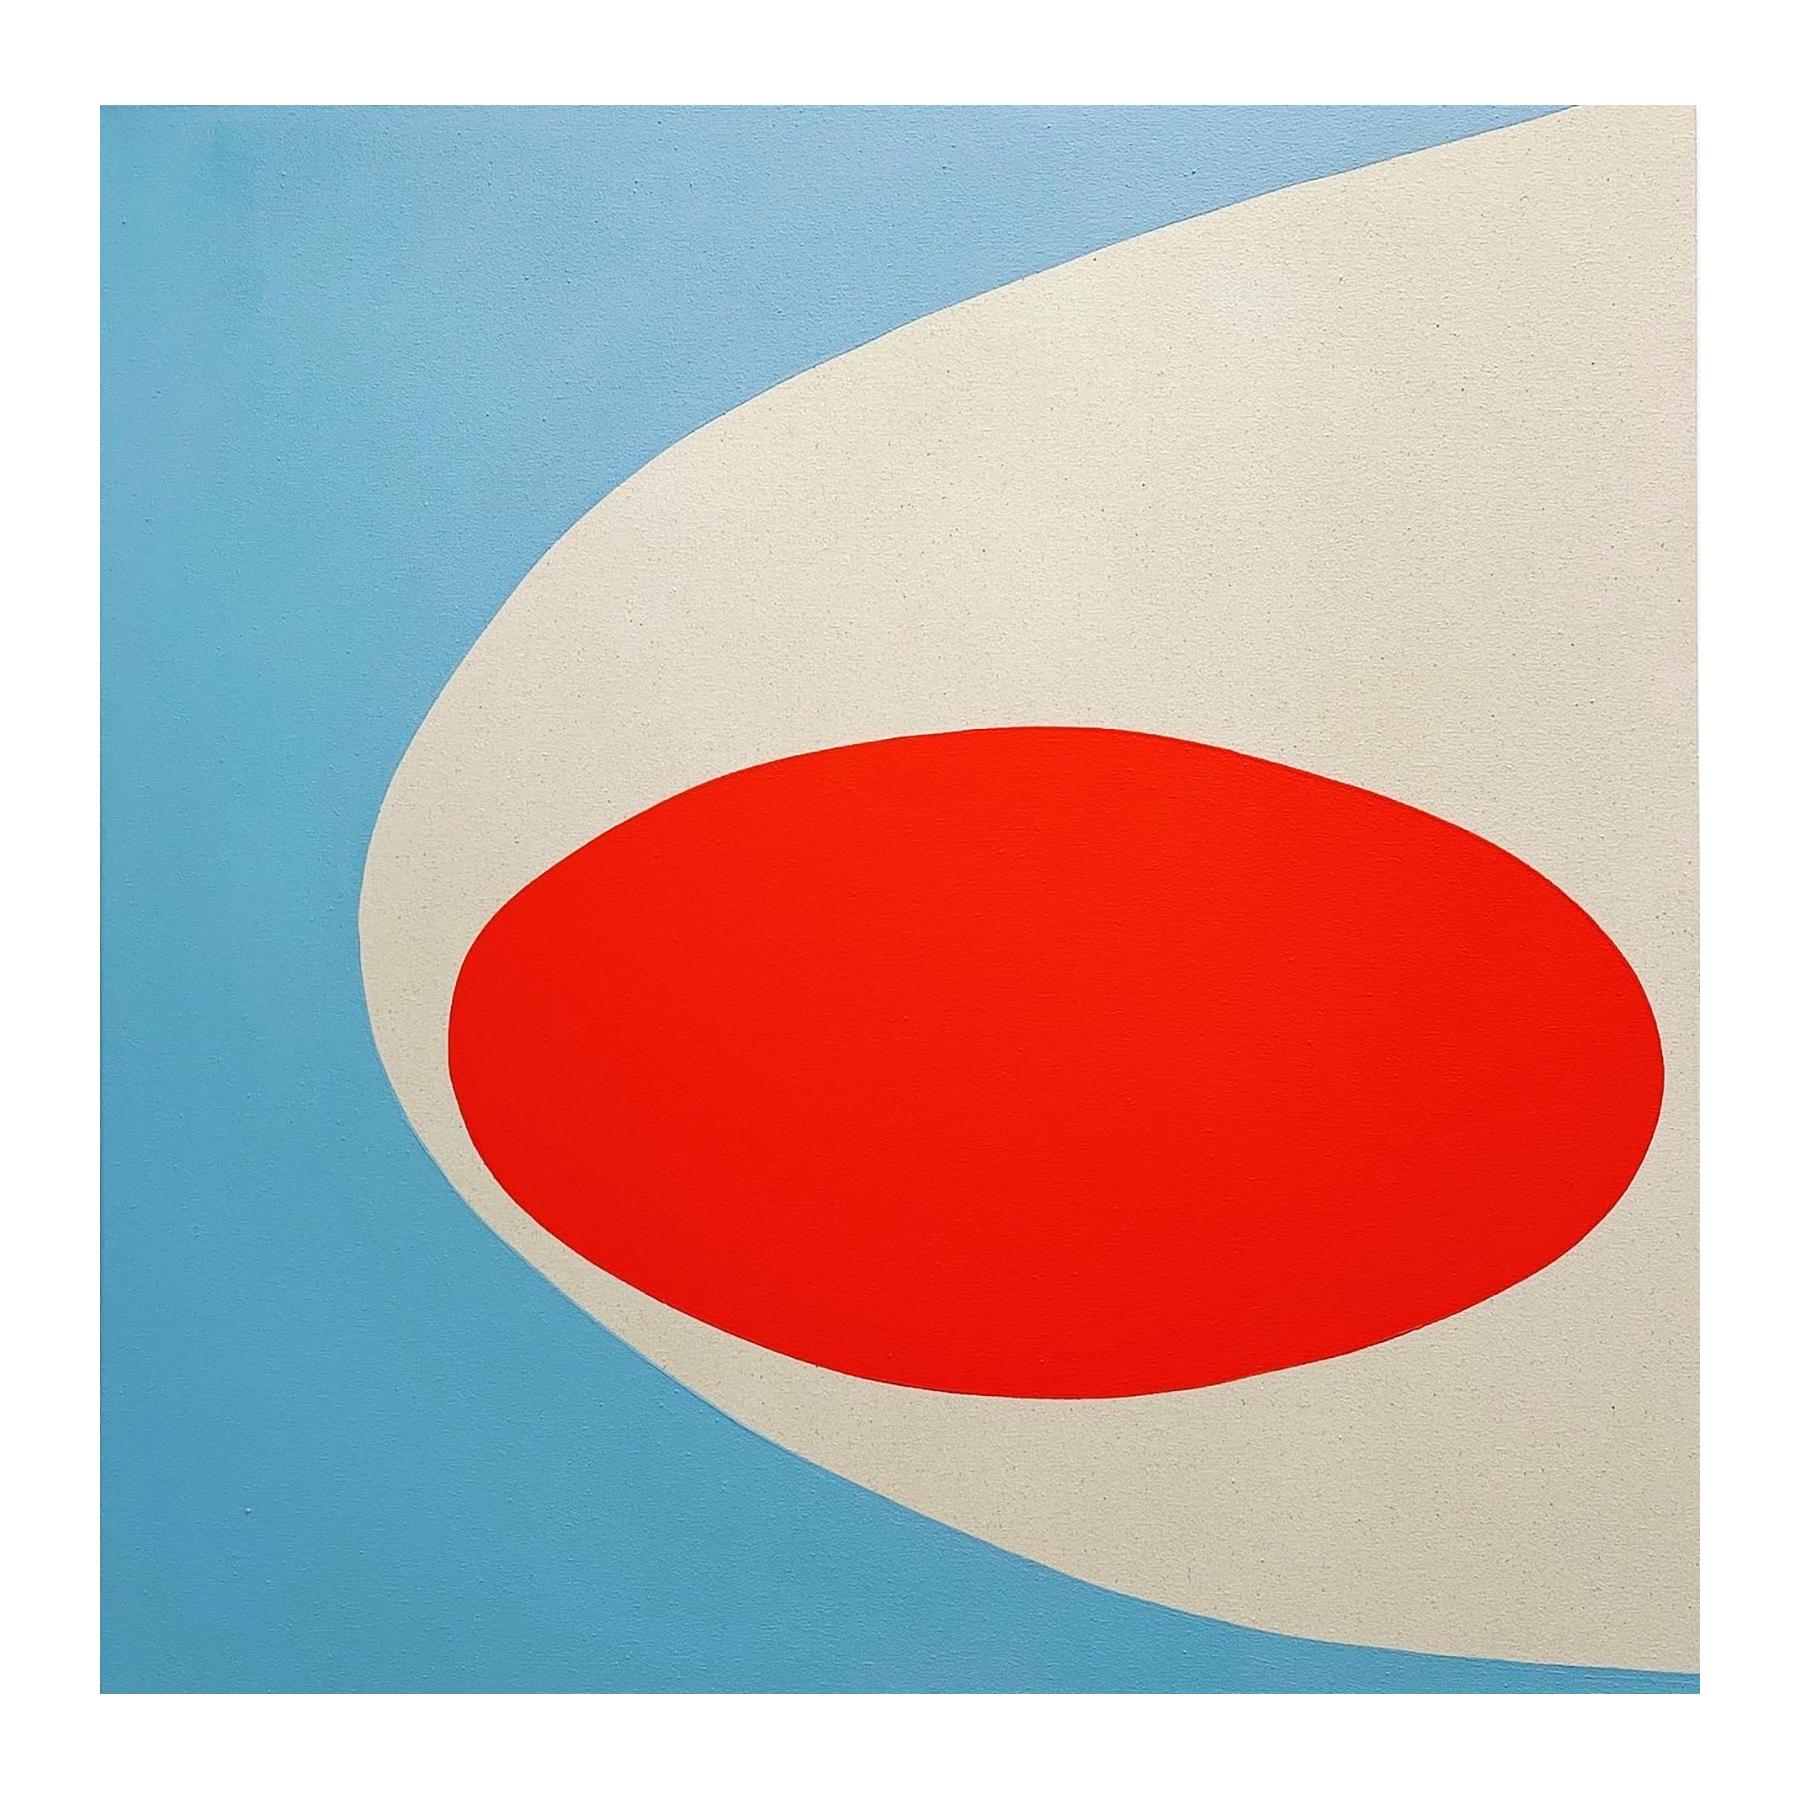 Contemporary geometric abstract painting by Houston-based artist Gary Griffin. The work features an orange oval shape nestled in a light blue curve against an off-white background. Signed and titled on the reverse. Recently featured in 